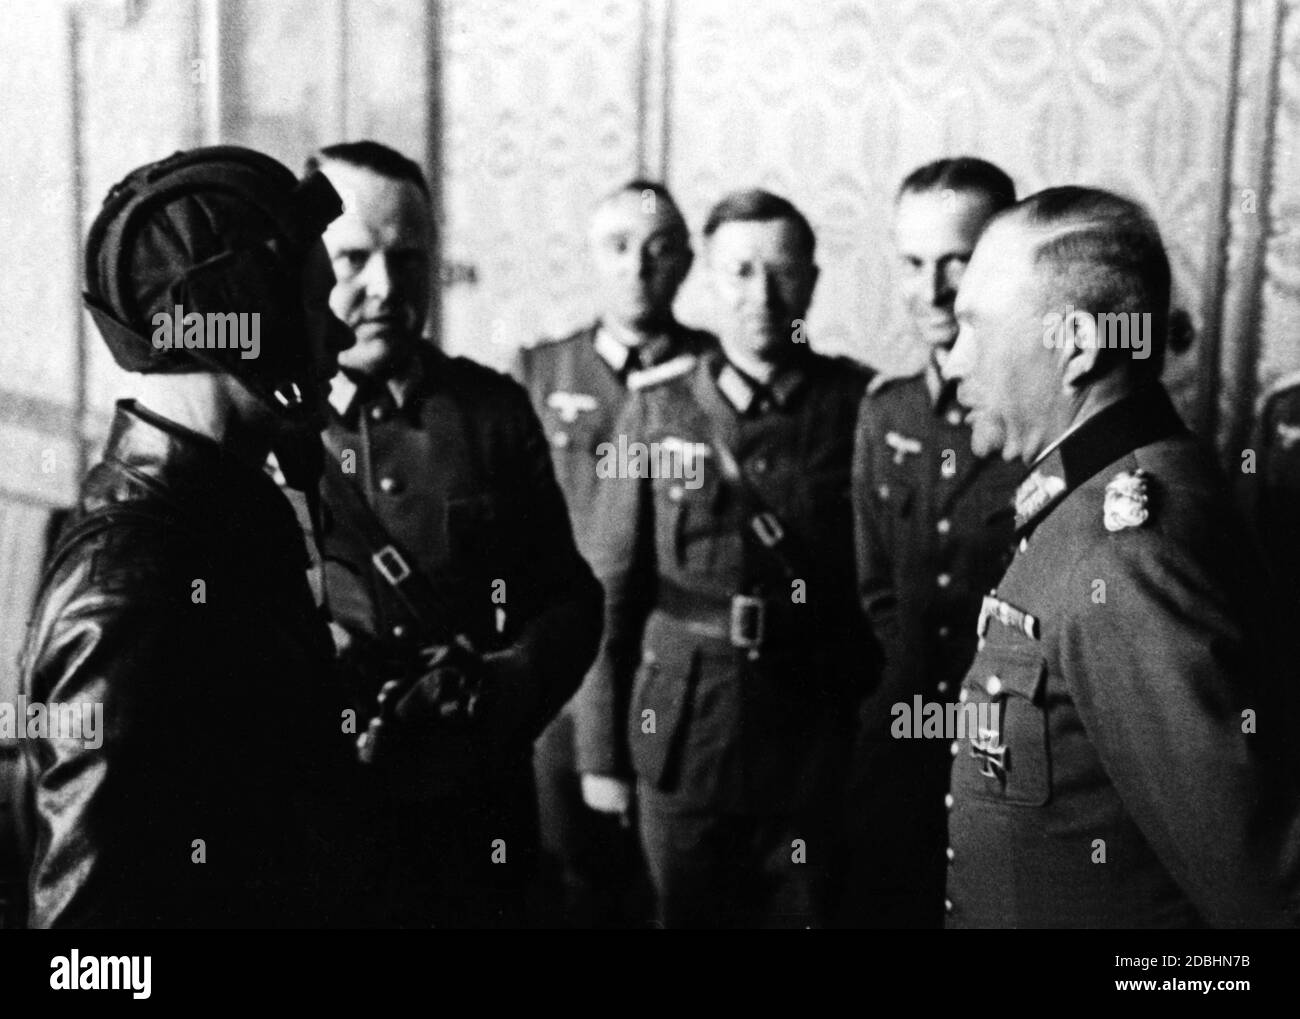 German and Russian troops meet for the first time in Poland near Brest-Litowsk. Here General Heinz Guderian and a Russian Air Force Officer. Stock Photo